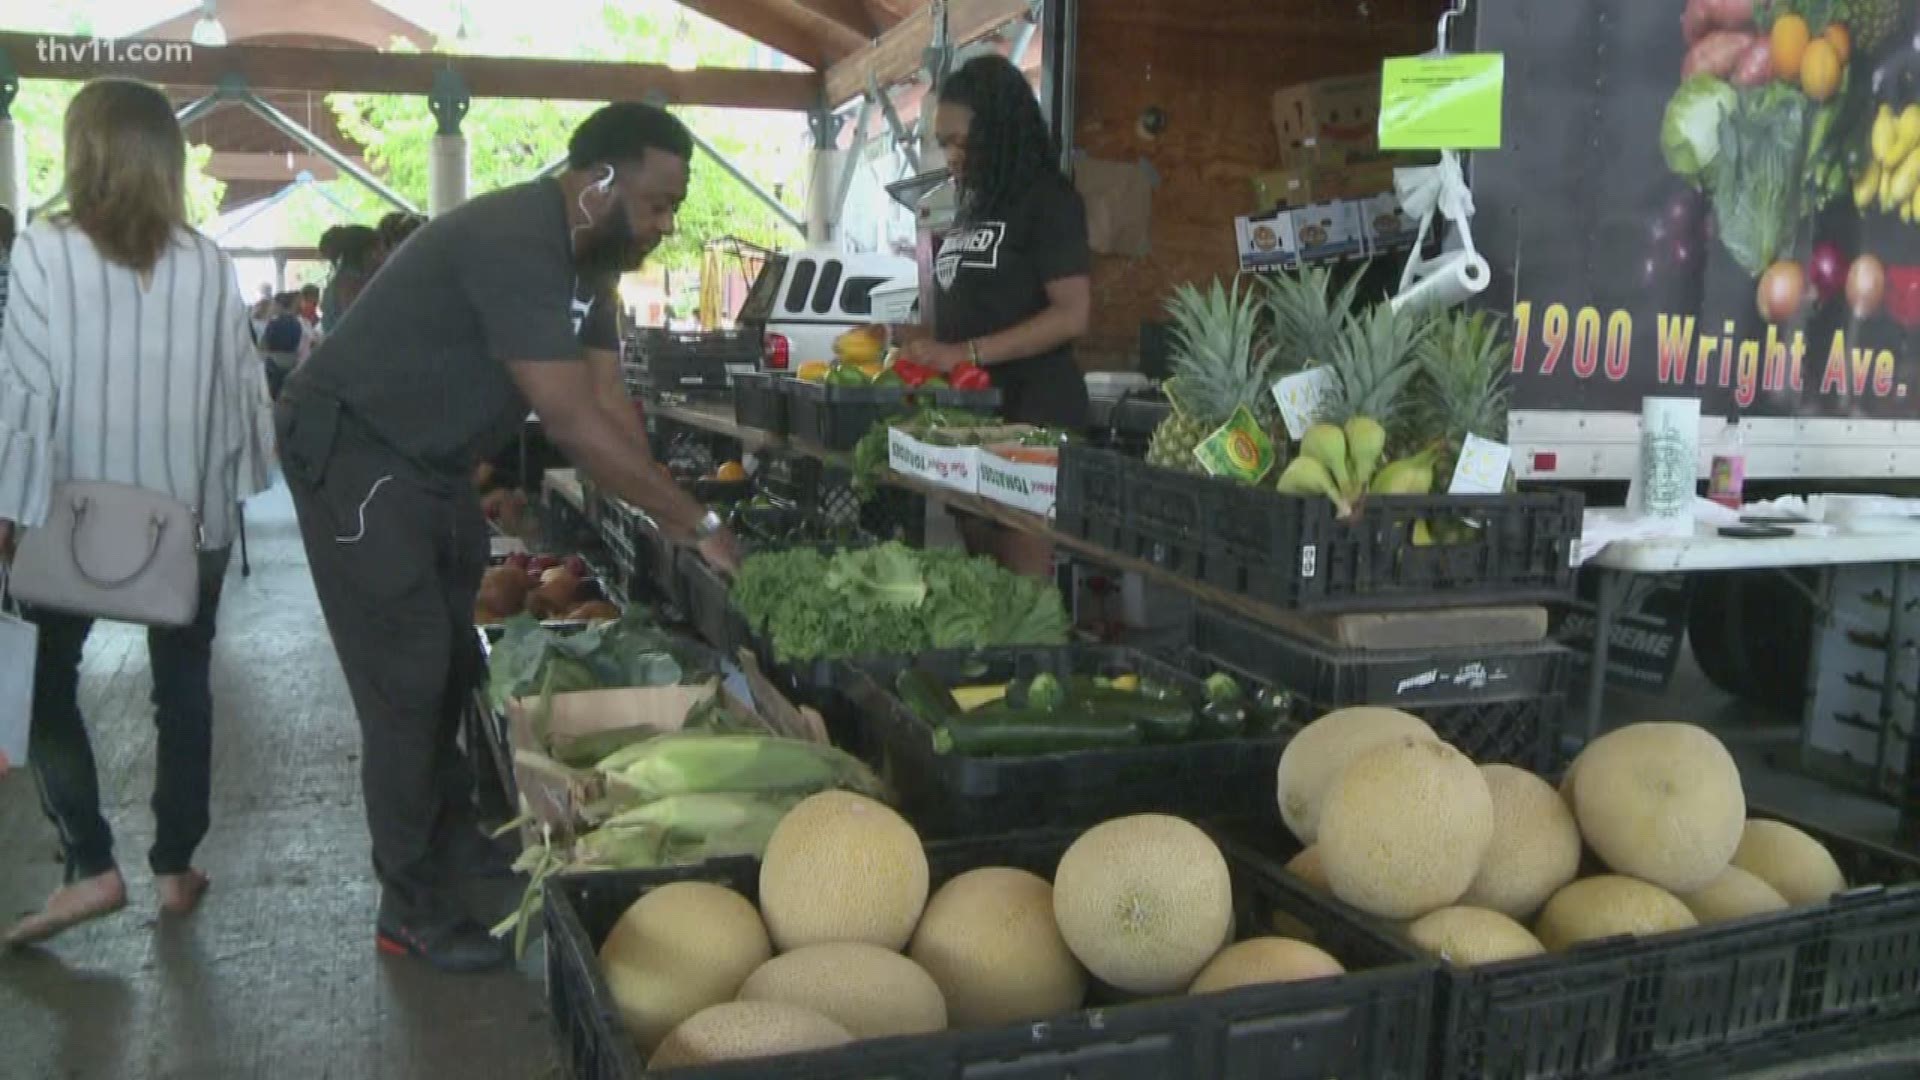 If you're looking for your local produce this spring and summer, you may see some changes.